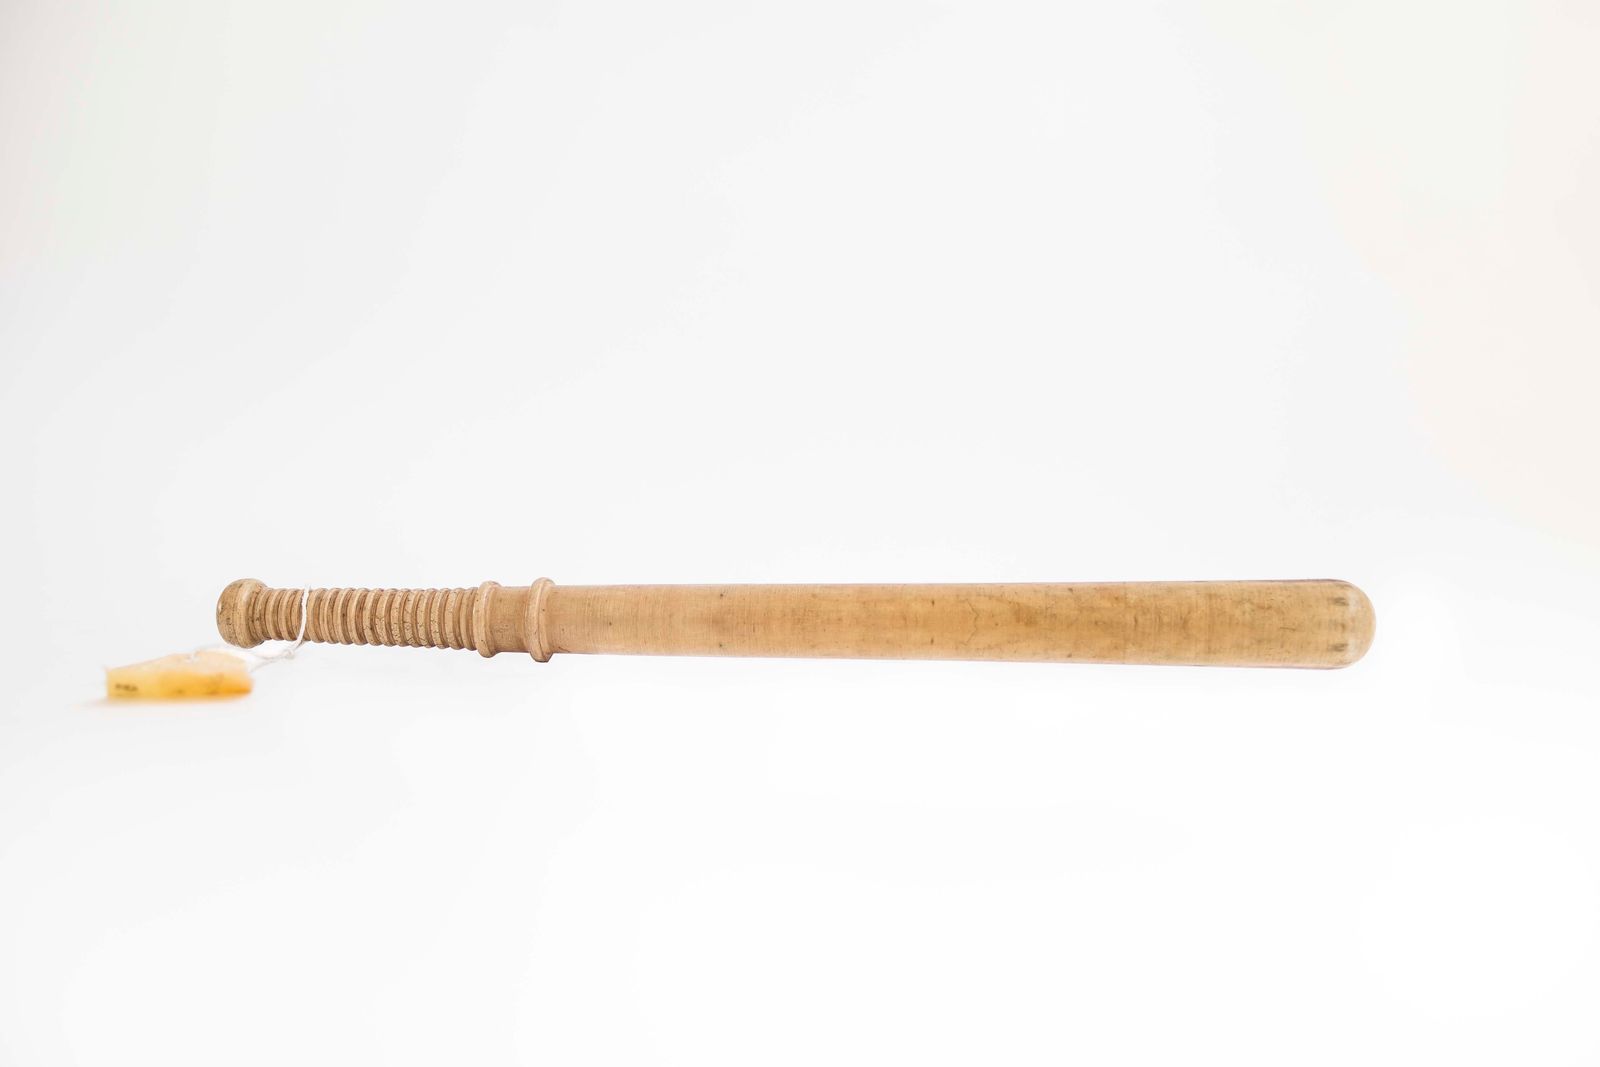 © Amilton Neves Cuna - A wooden bat used for torture by PIDE officers. Now on display at the Museum of the Revolution in Maputo.